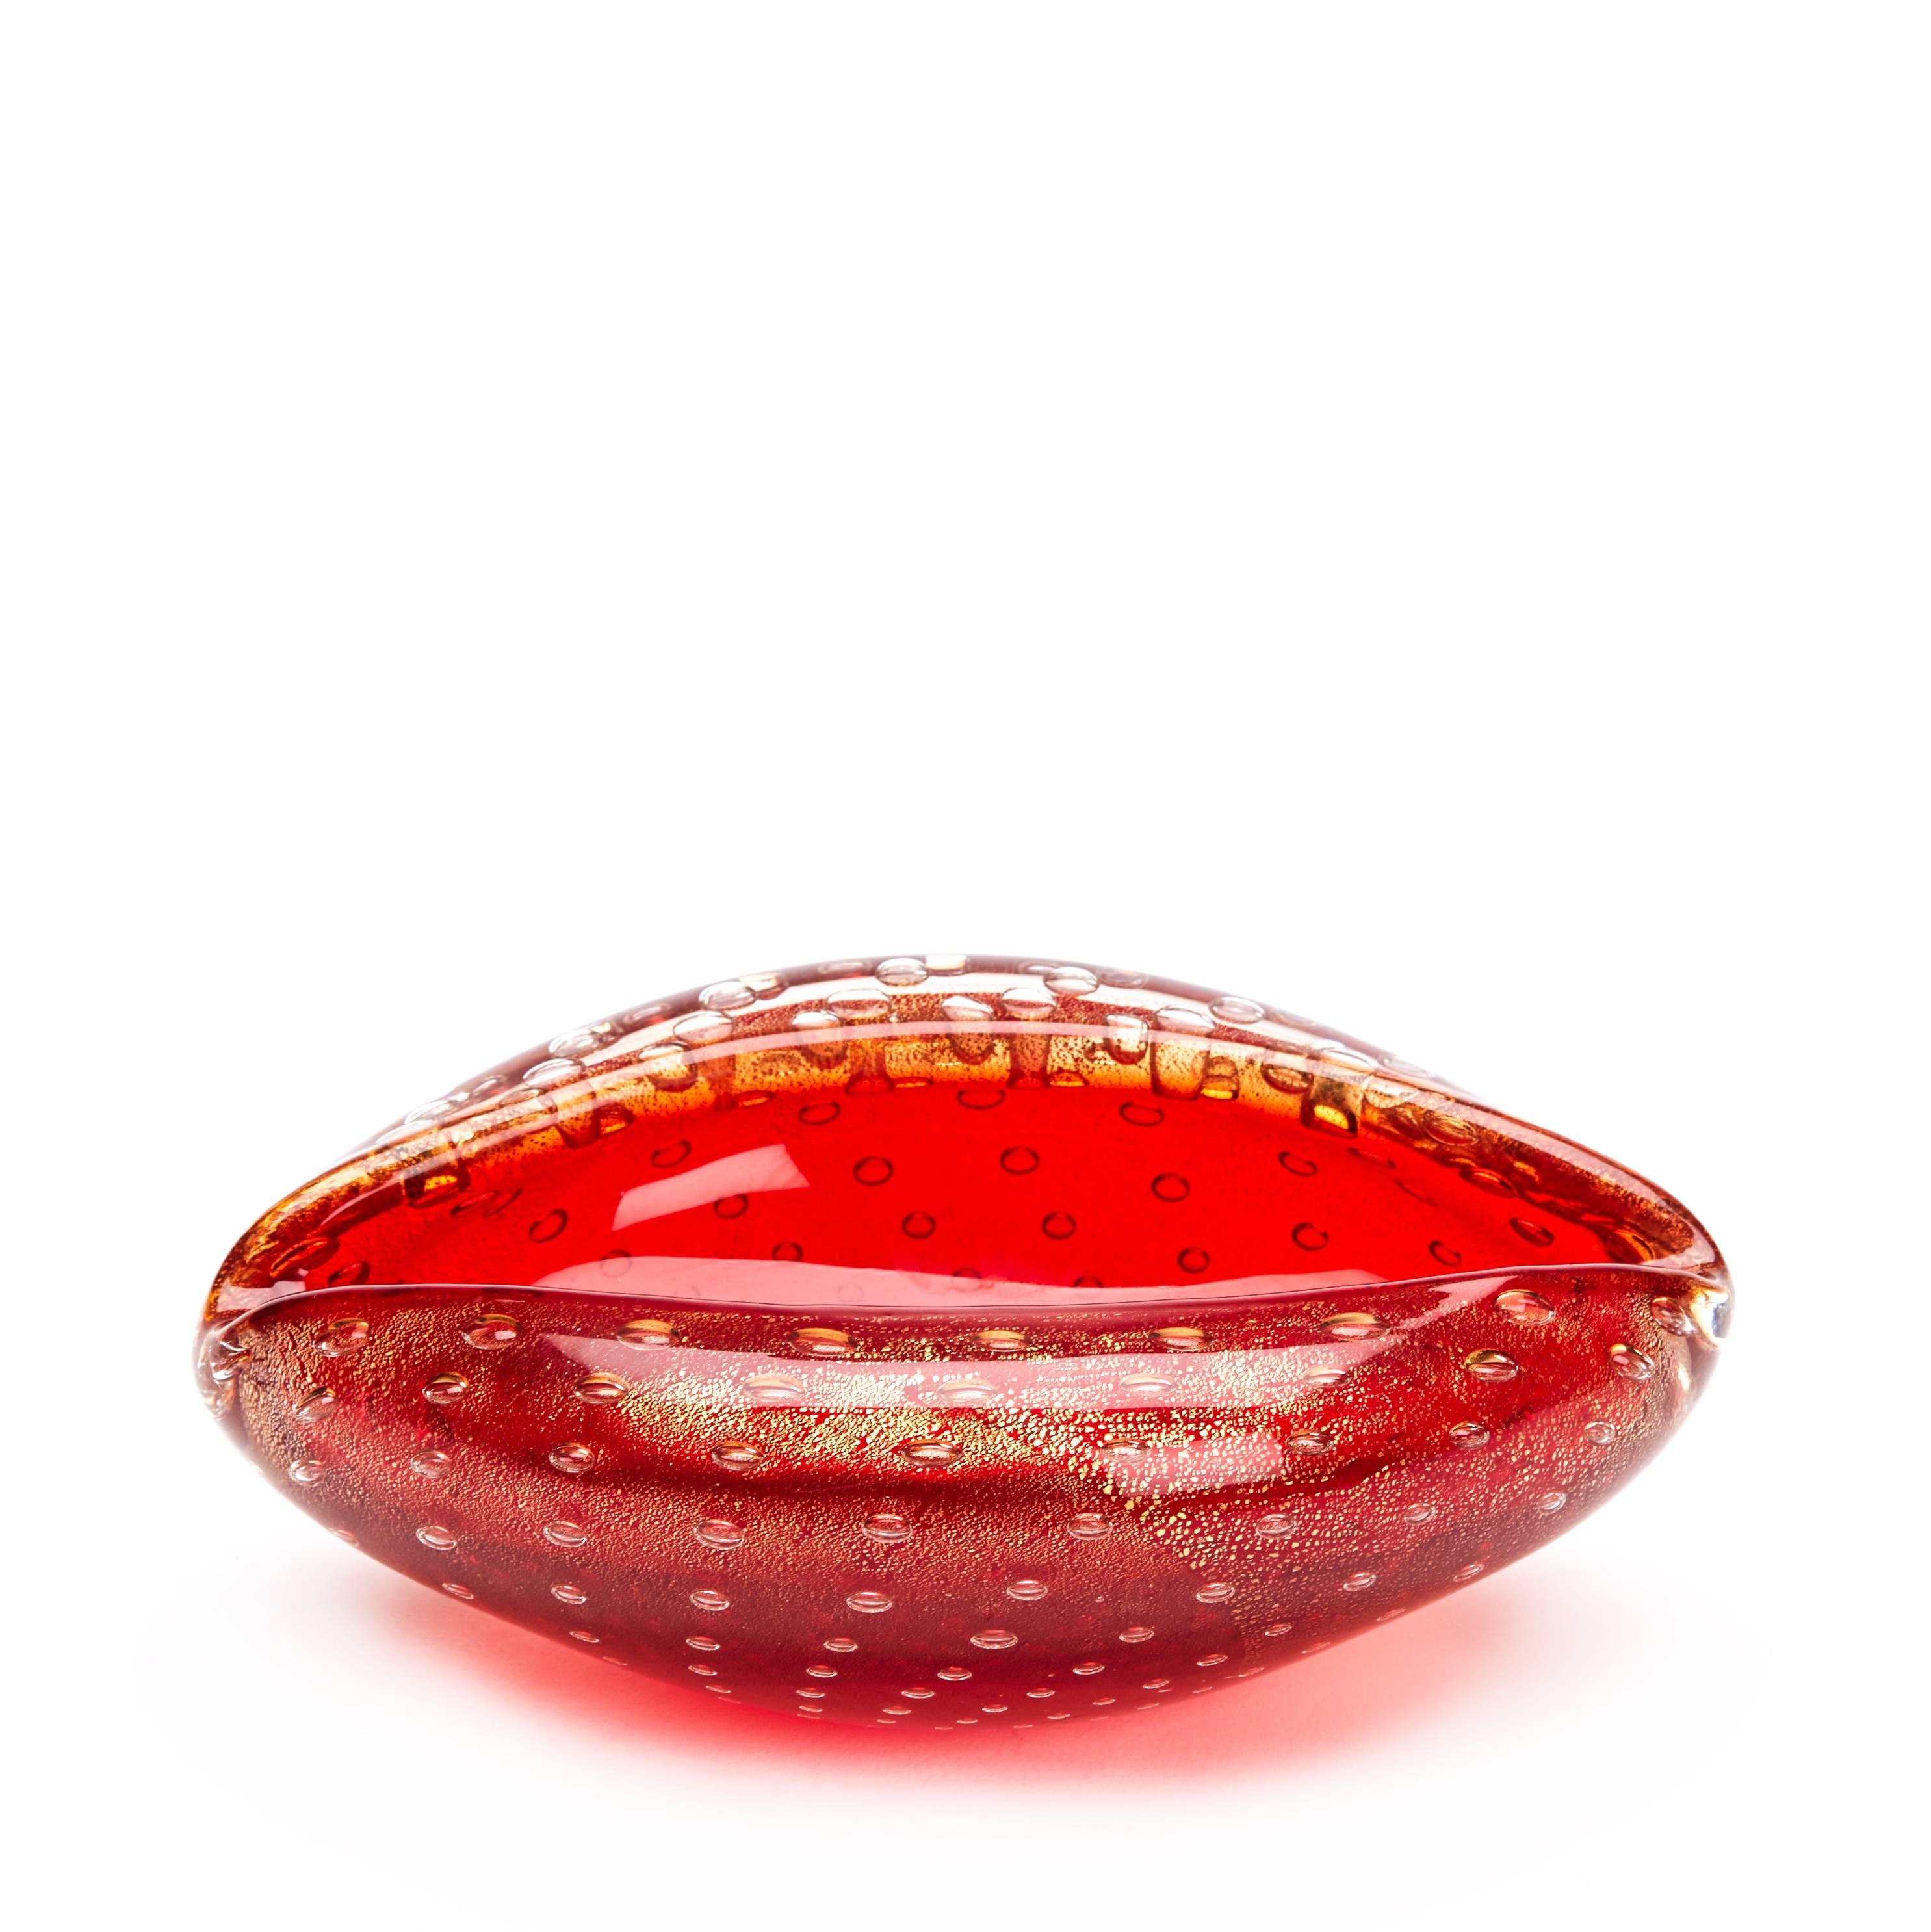 Late 20th Century Vintage Murano Lips Red Glass Bowl Stefano Toso, circa 1970